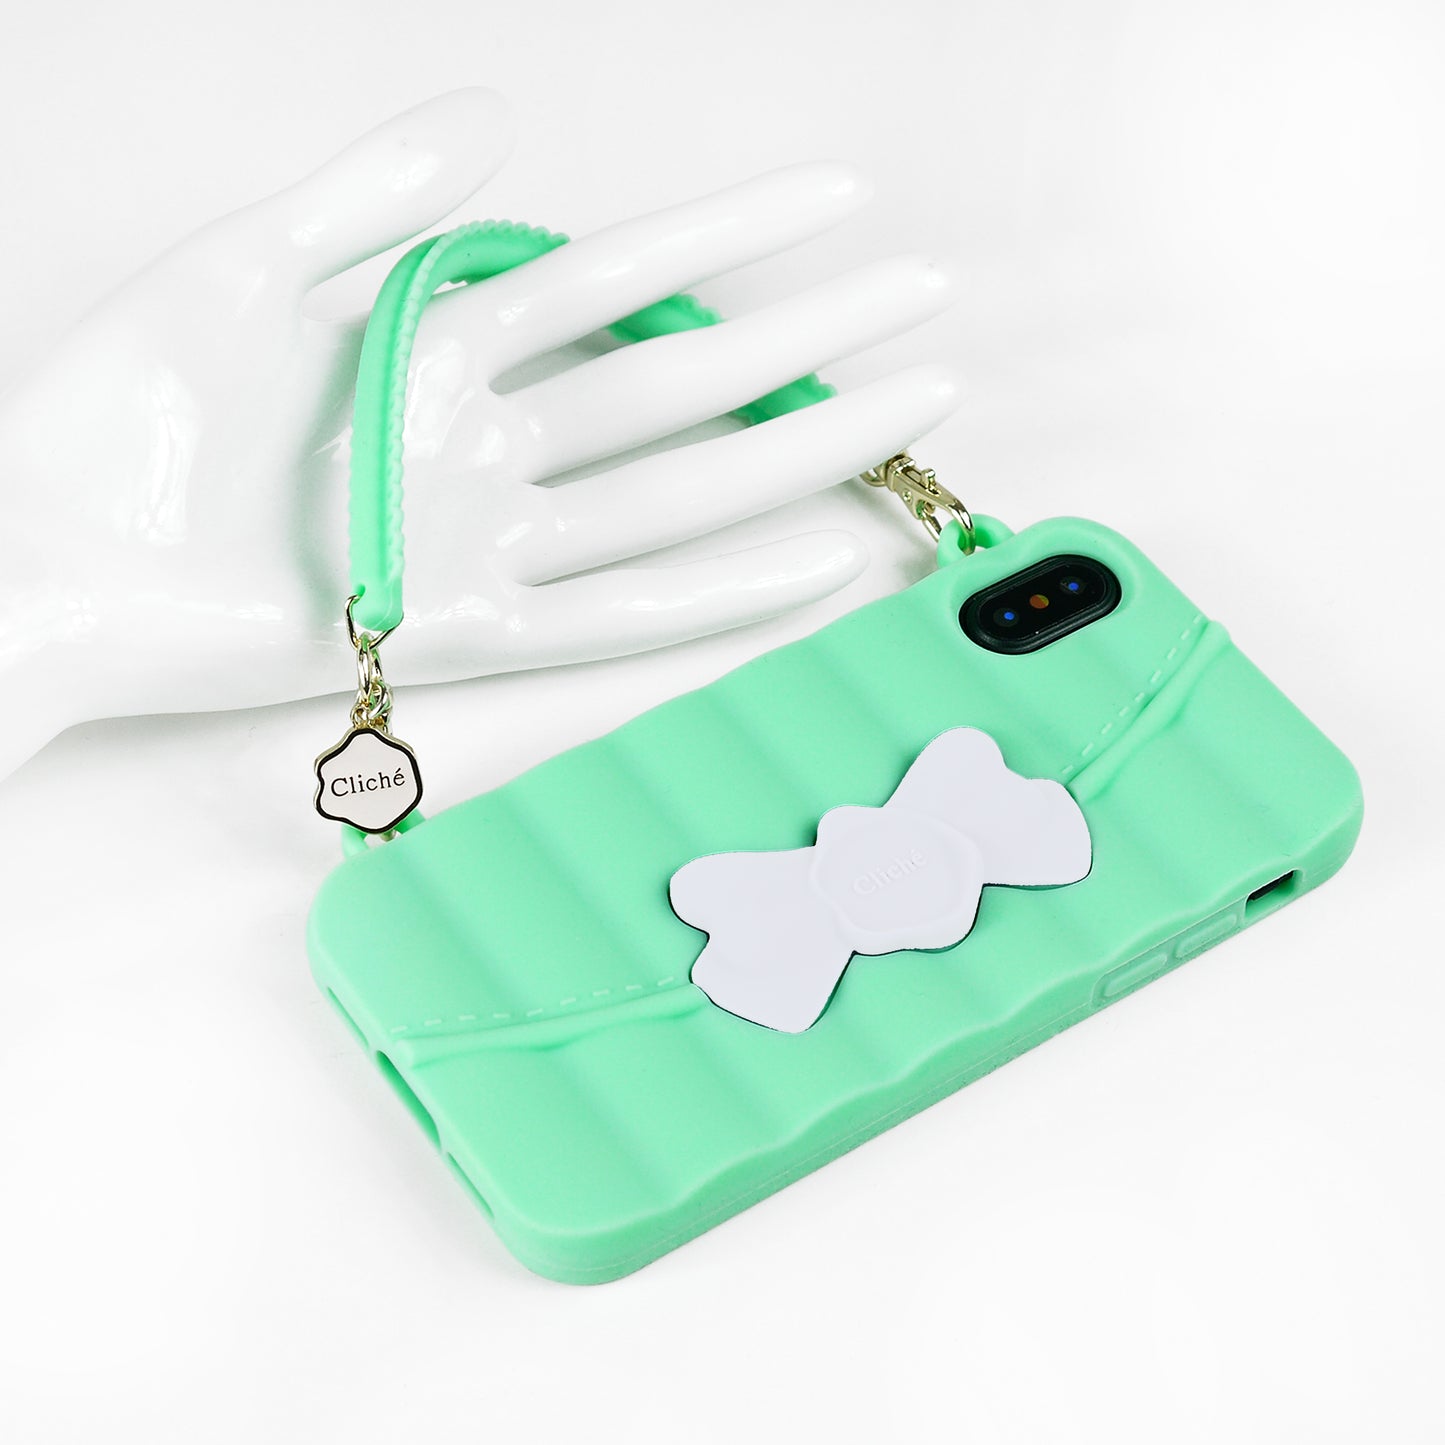 iPhone X/Xs Case - Matelasse (Green with White Ribbon)